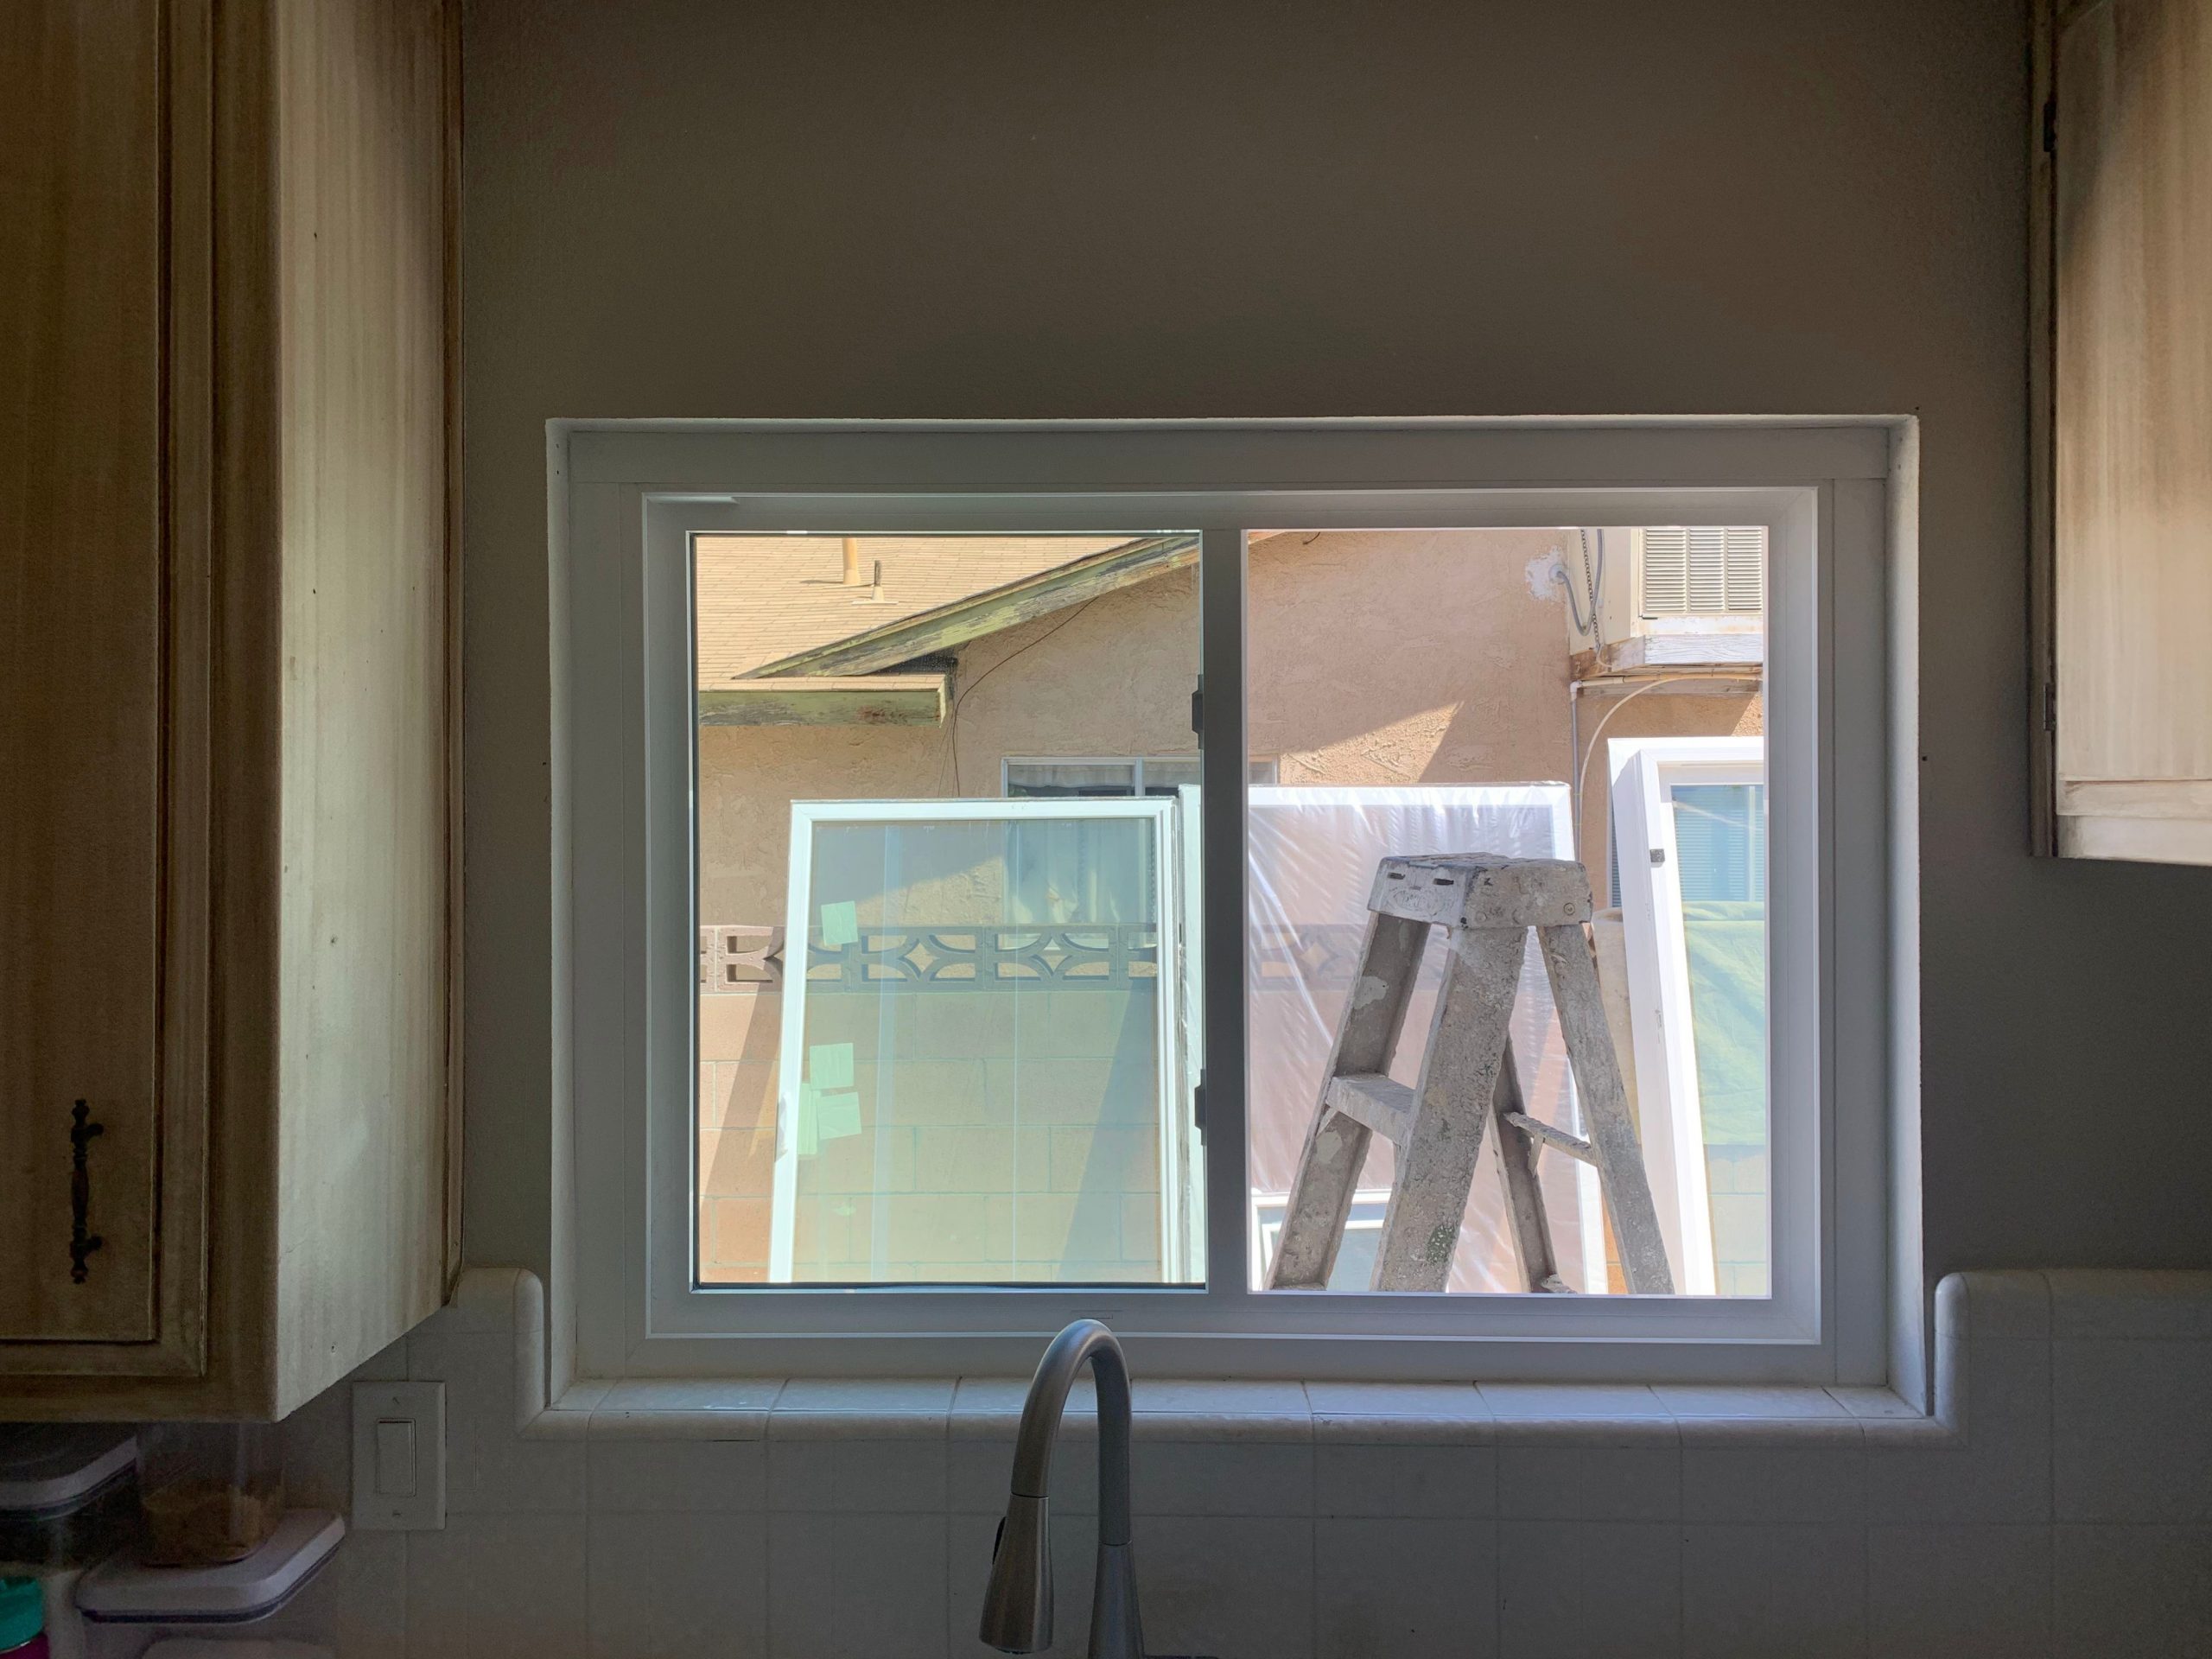 Windows & TexCote Coolwall installation in Ridgecrest, CA